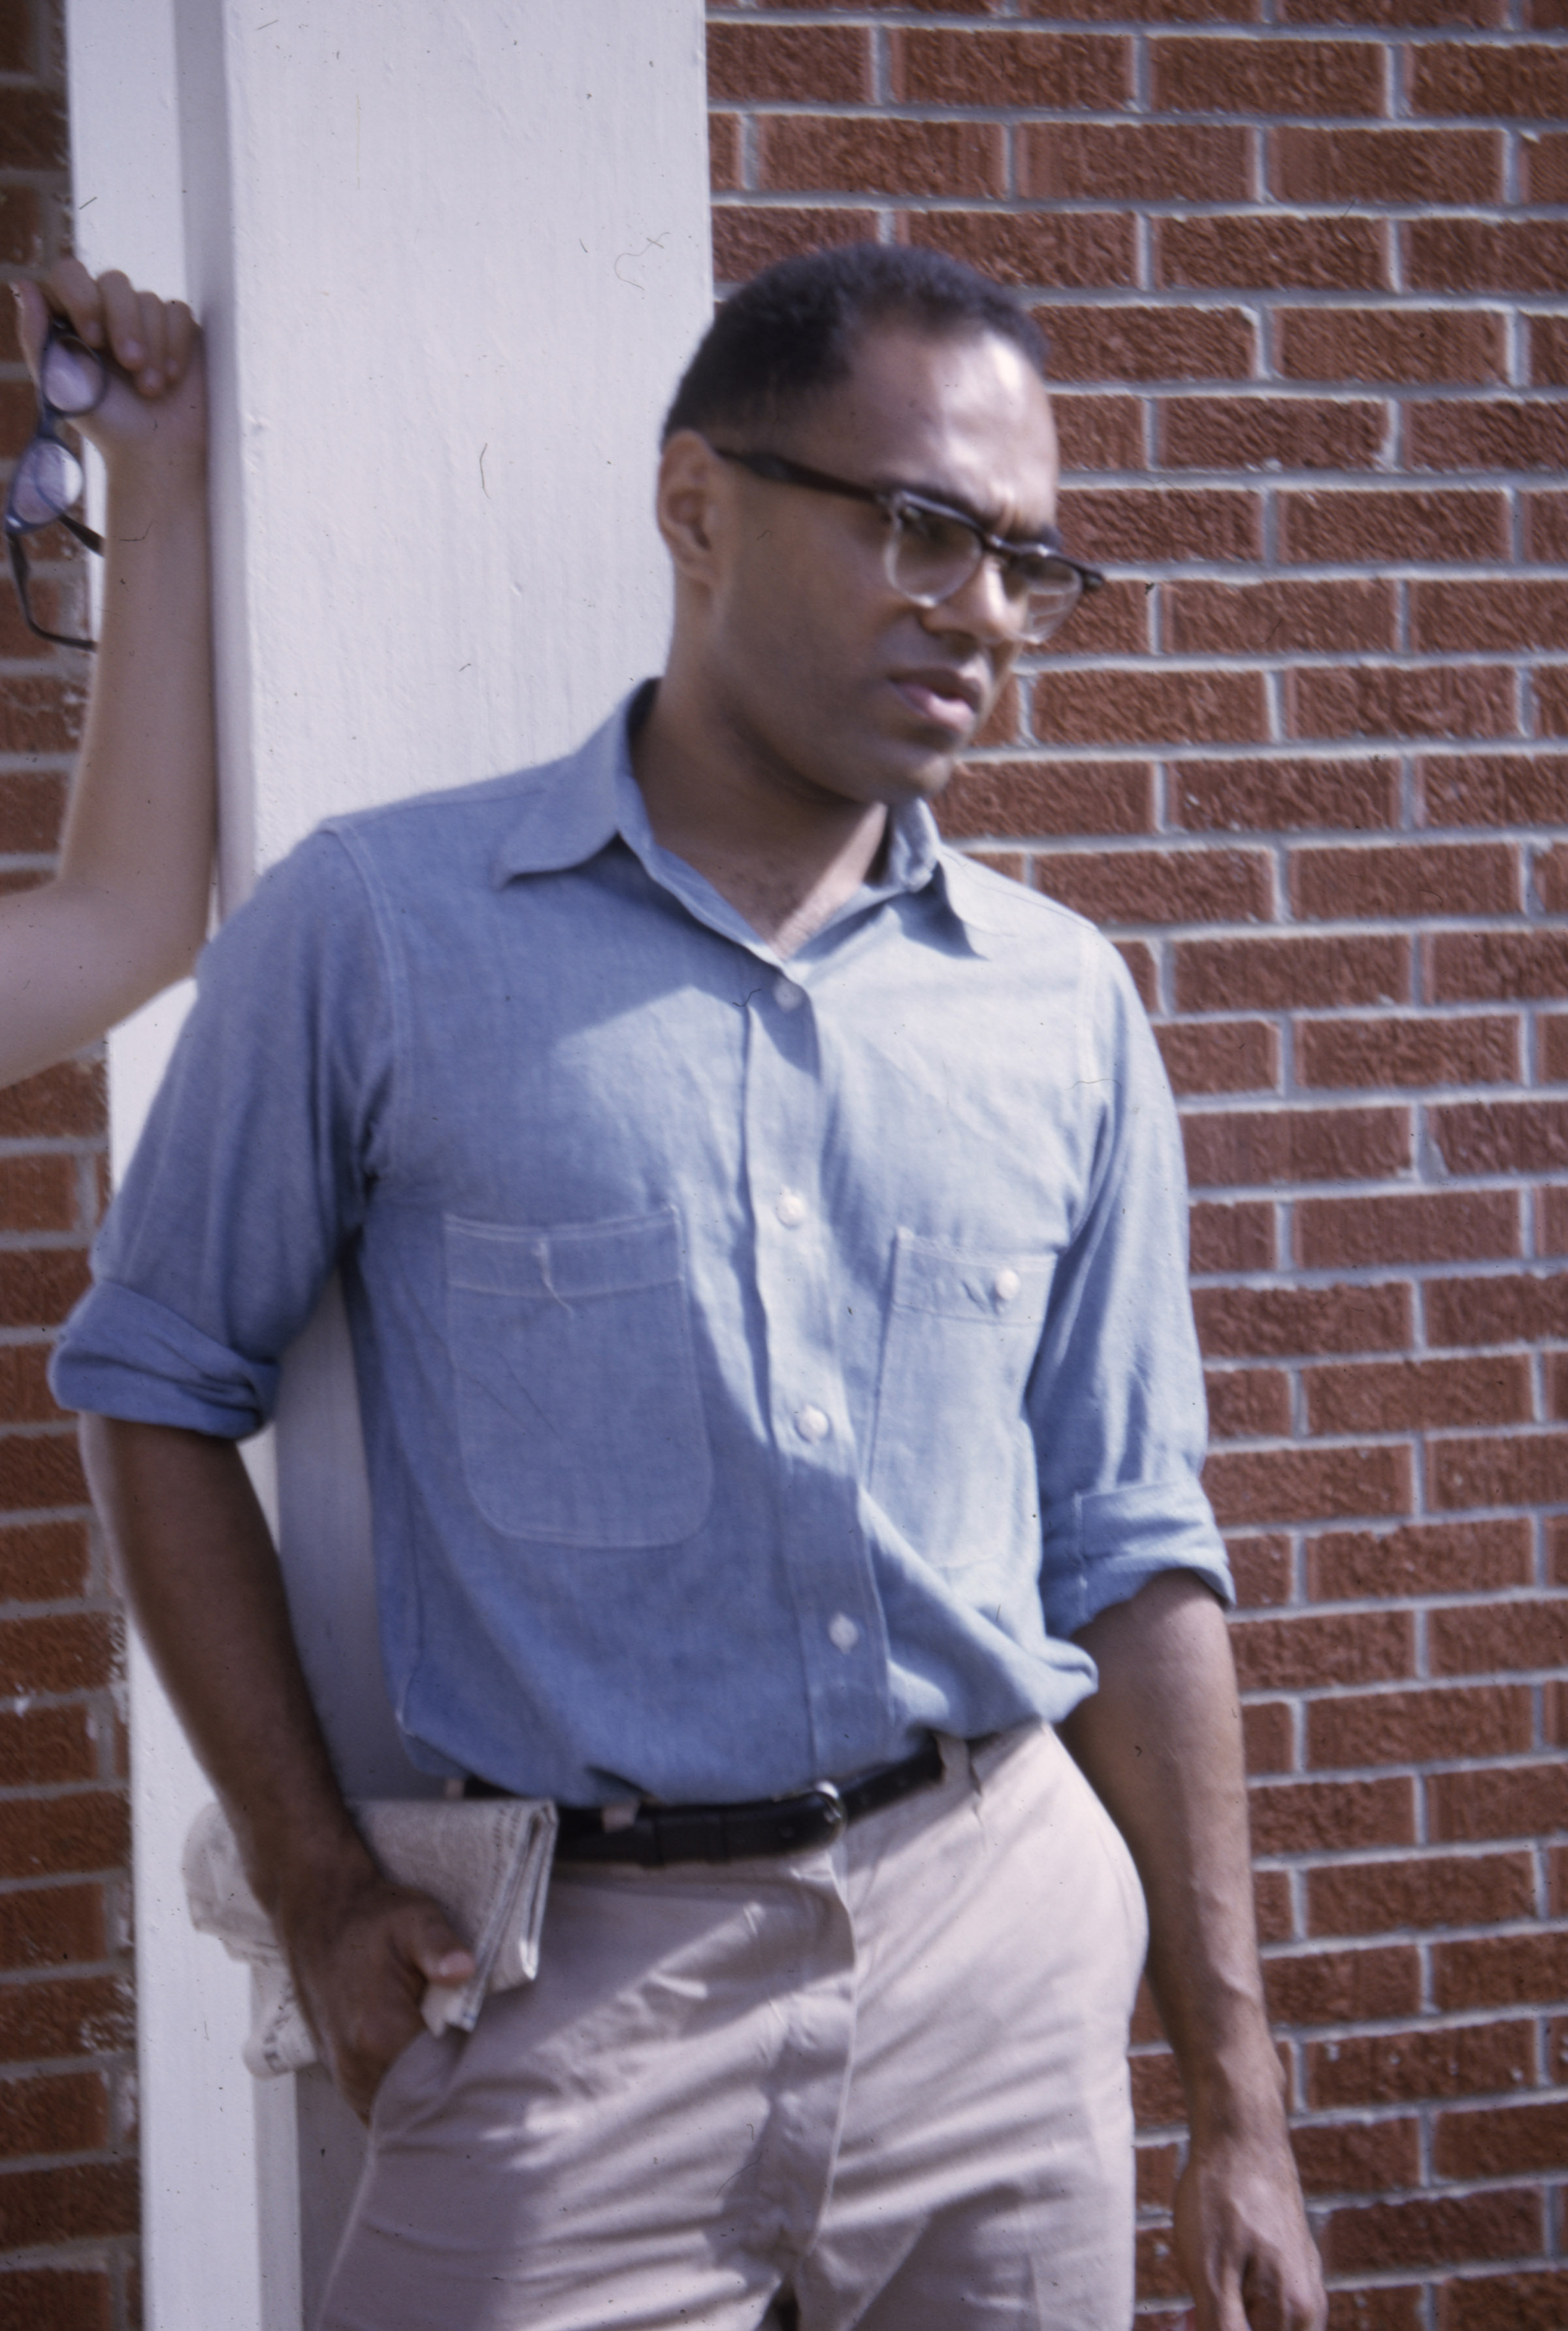 Bob Moses in Jackson, Mississippi, 1964. Photograph by Roland Duerksen. Robert Moses talks with volunteers during an intermission of a mock political convention he organized to get young African Americans involved in the political process. Mississippi Freedom Summer Collection, Walter Havighurst Special Collections and University Archives, Miami University Libraries, Oxford OH.